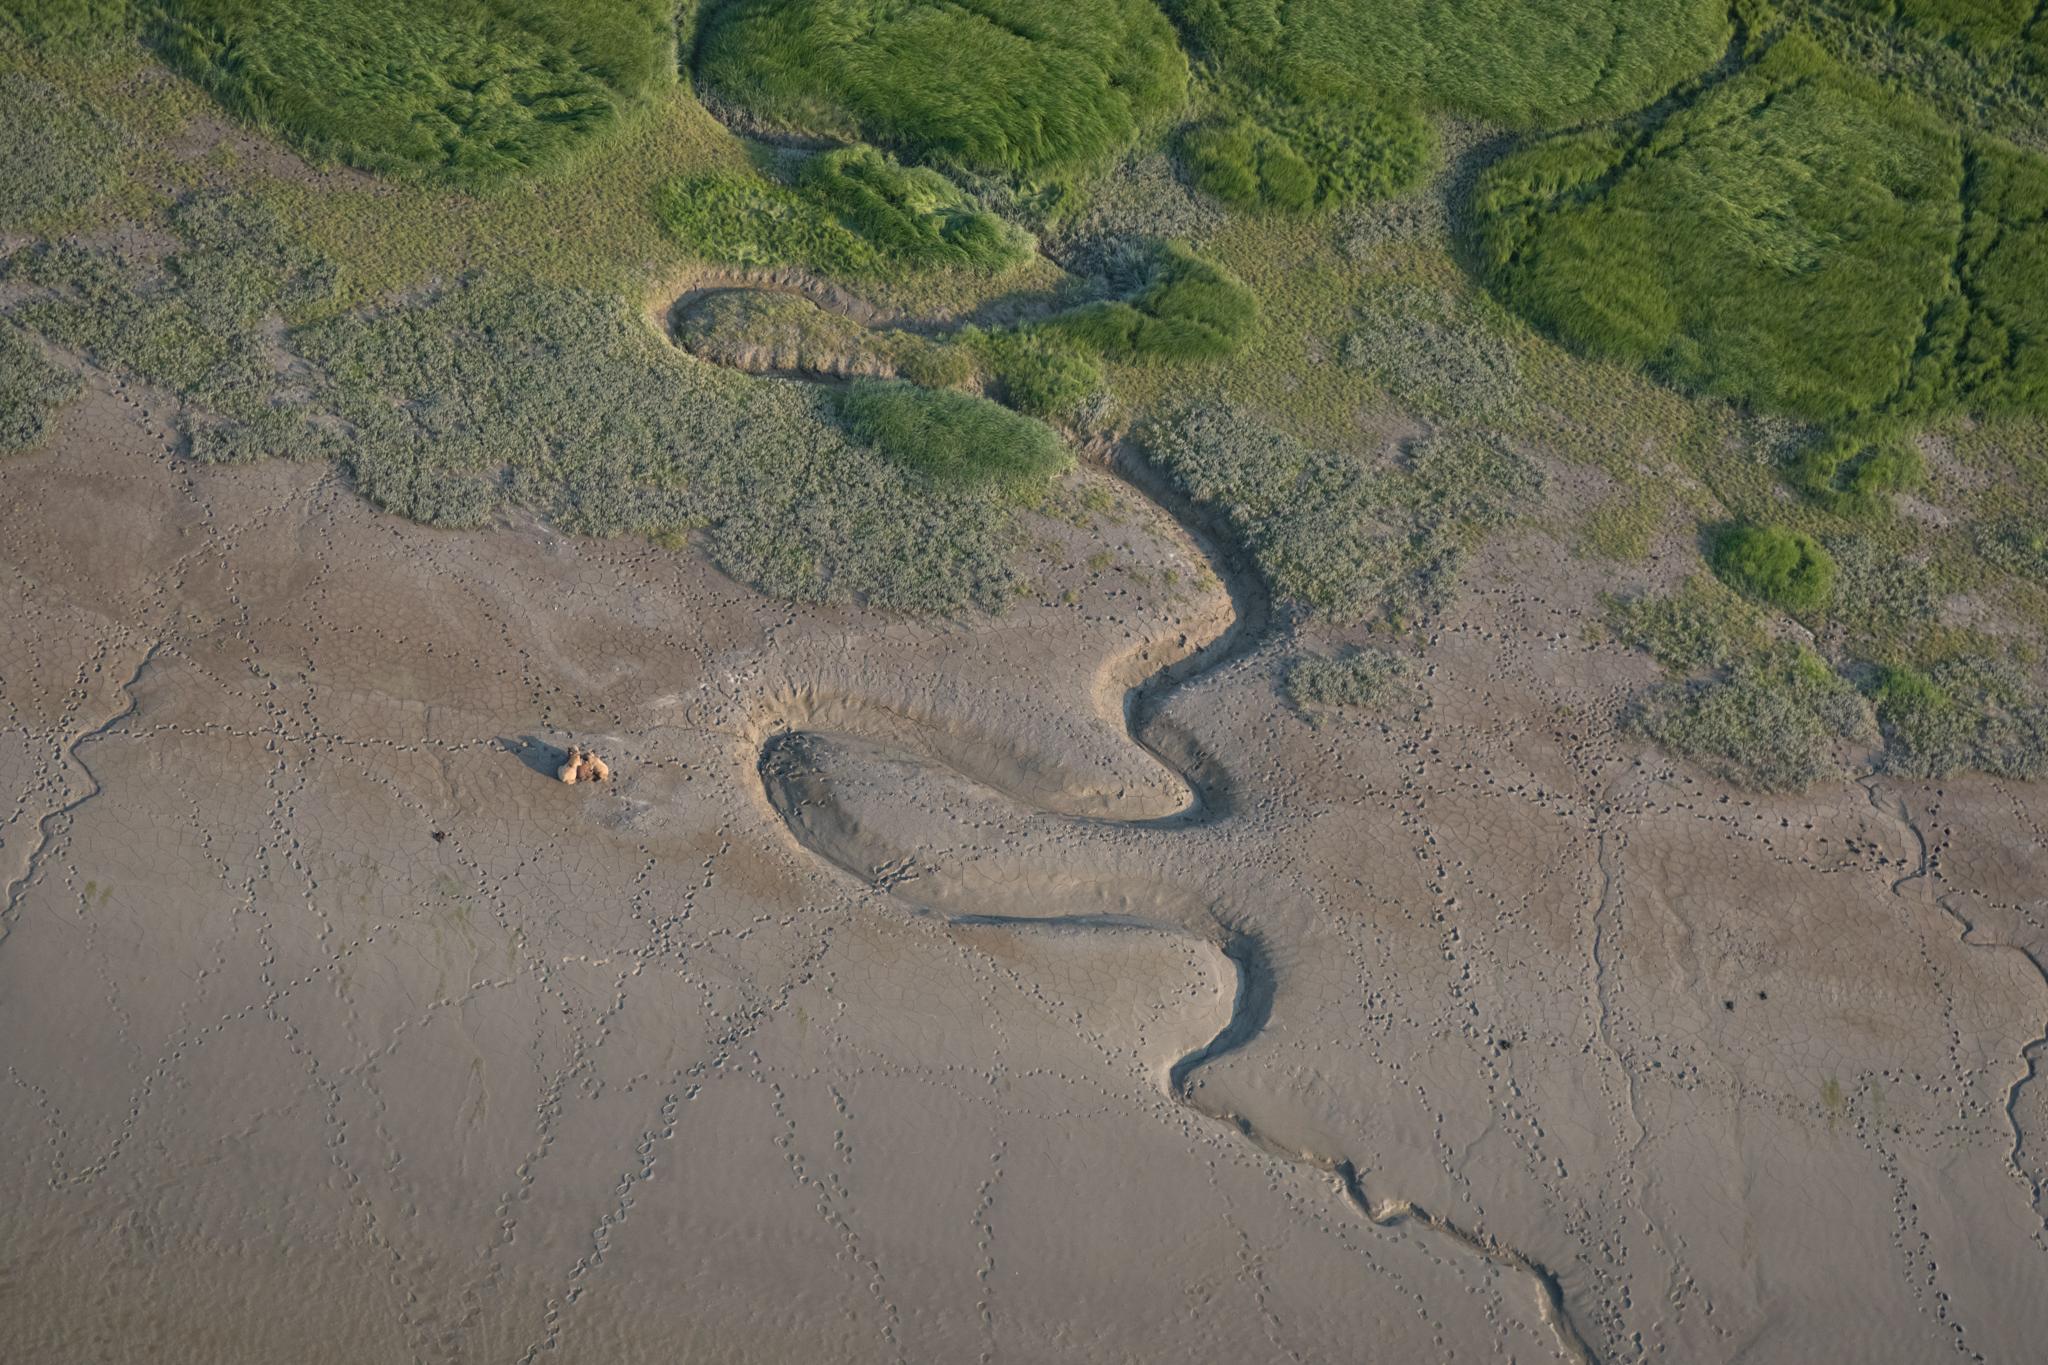 Rivers etch patterns in the silty shores of Chinitna Bay, a renowned brown bear viewing area in Lake Clark National Park and Preserve. The animals gather here to eat sedge grasses and clams in the mudflats in spring and early summer.